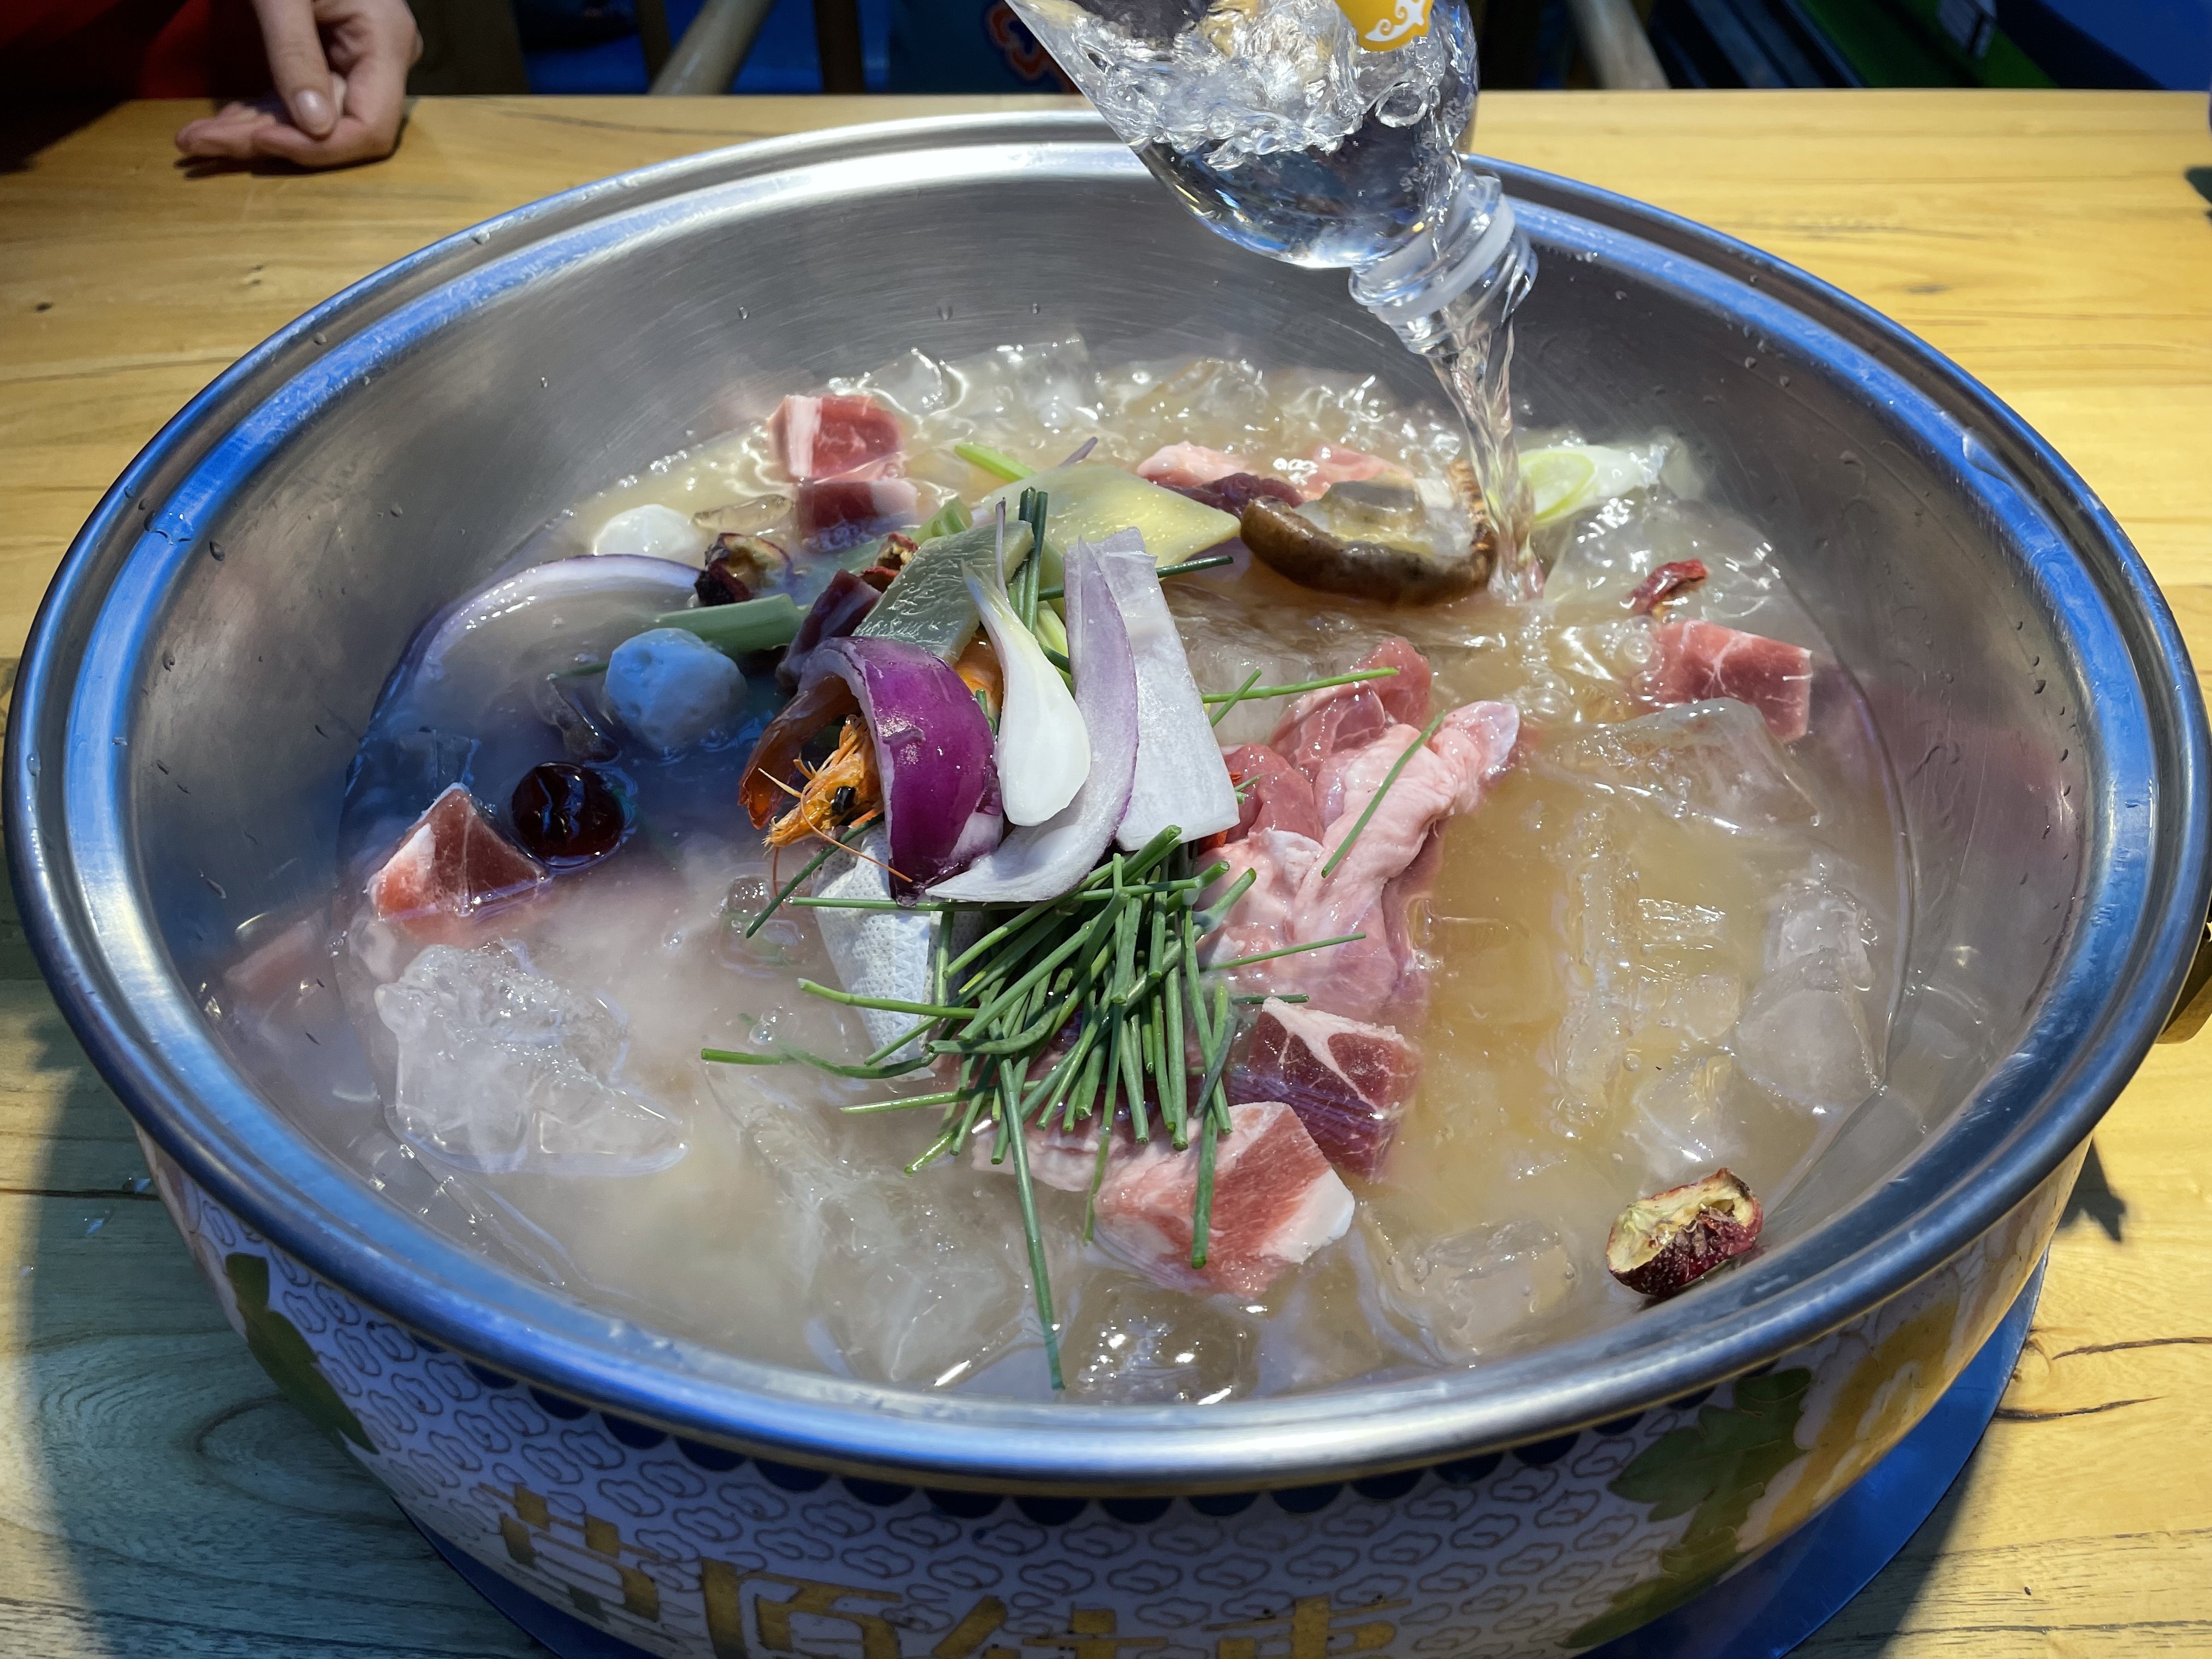 Lamb hotpot is a popular dish in northern China during the winter months. At Caoyuan Wangshi, a Mongolian specialist lamb hotpot chain, diced lamb cubes are served with ice to keep the meat fresh. Photo: Elaine Yau